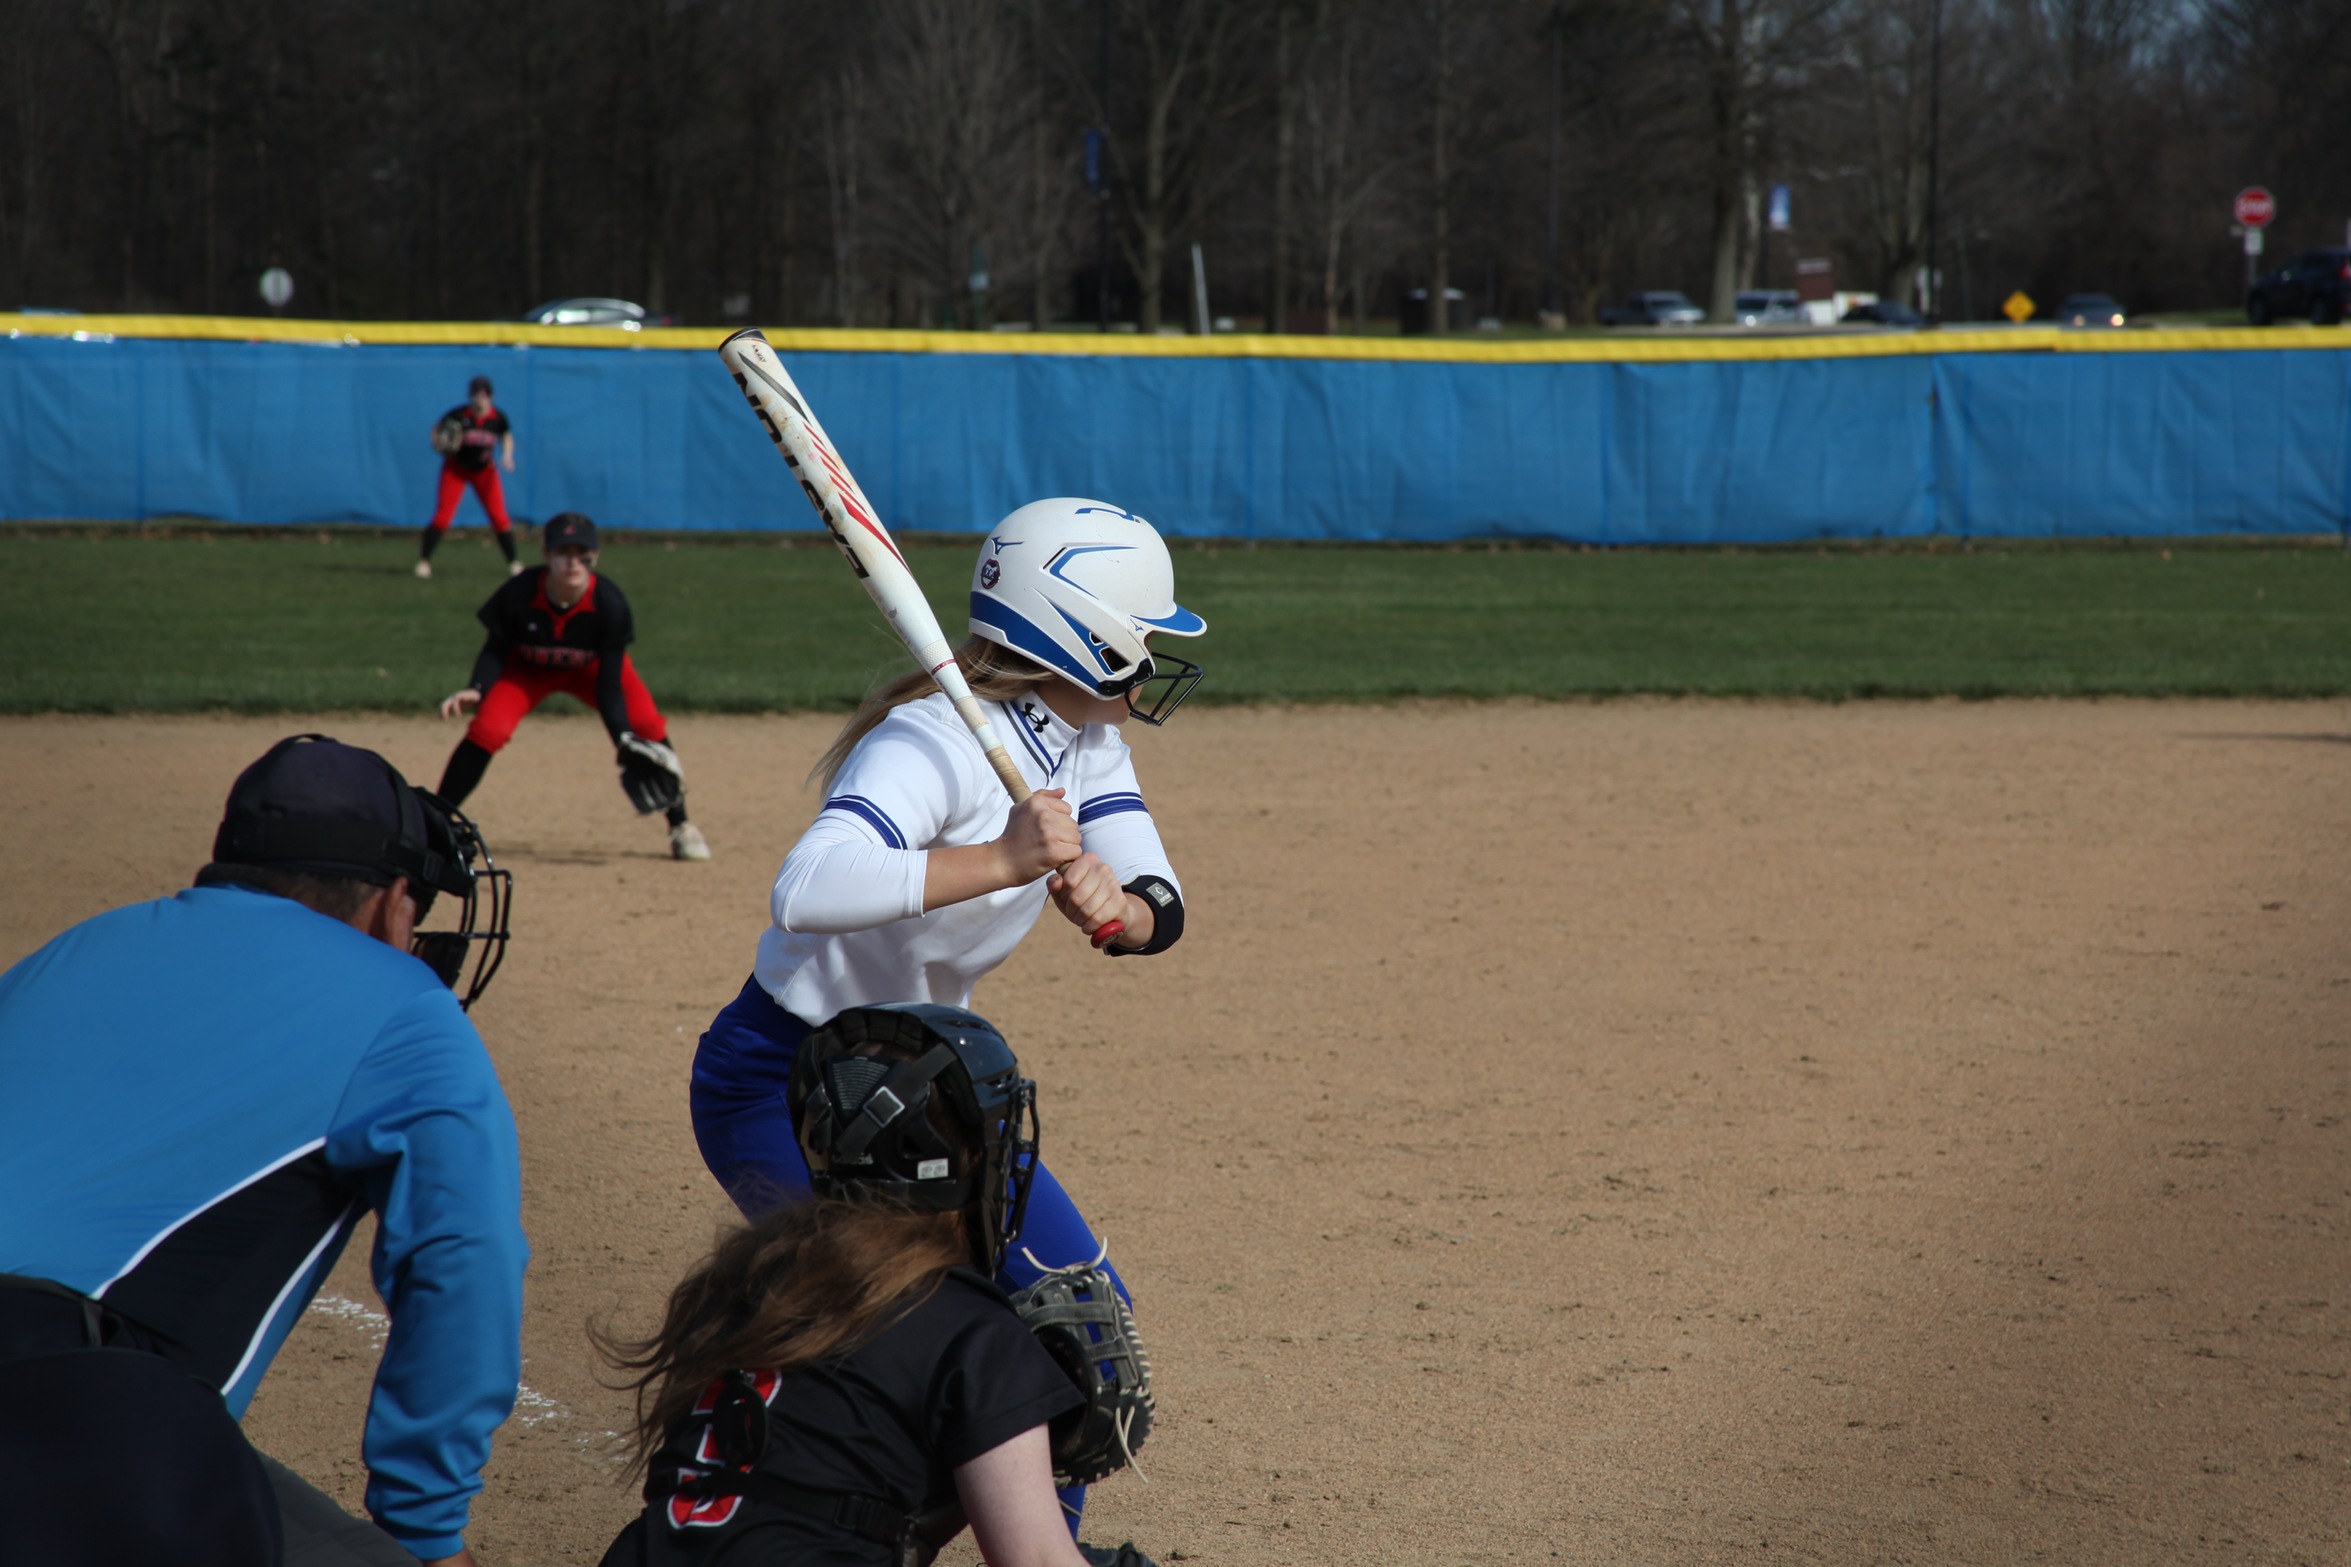 Lakers softball splits with Chargers